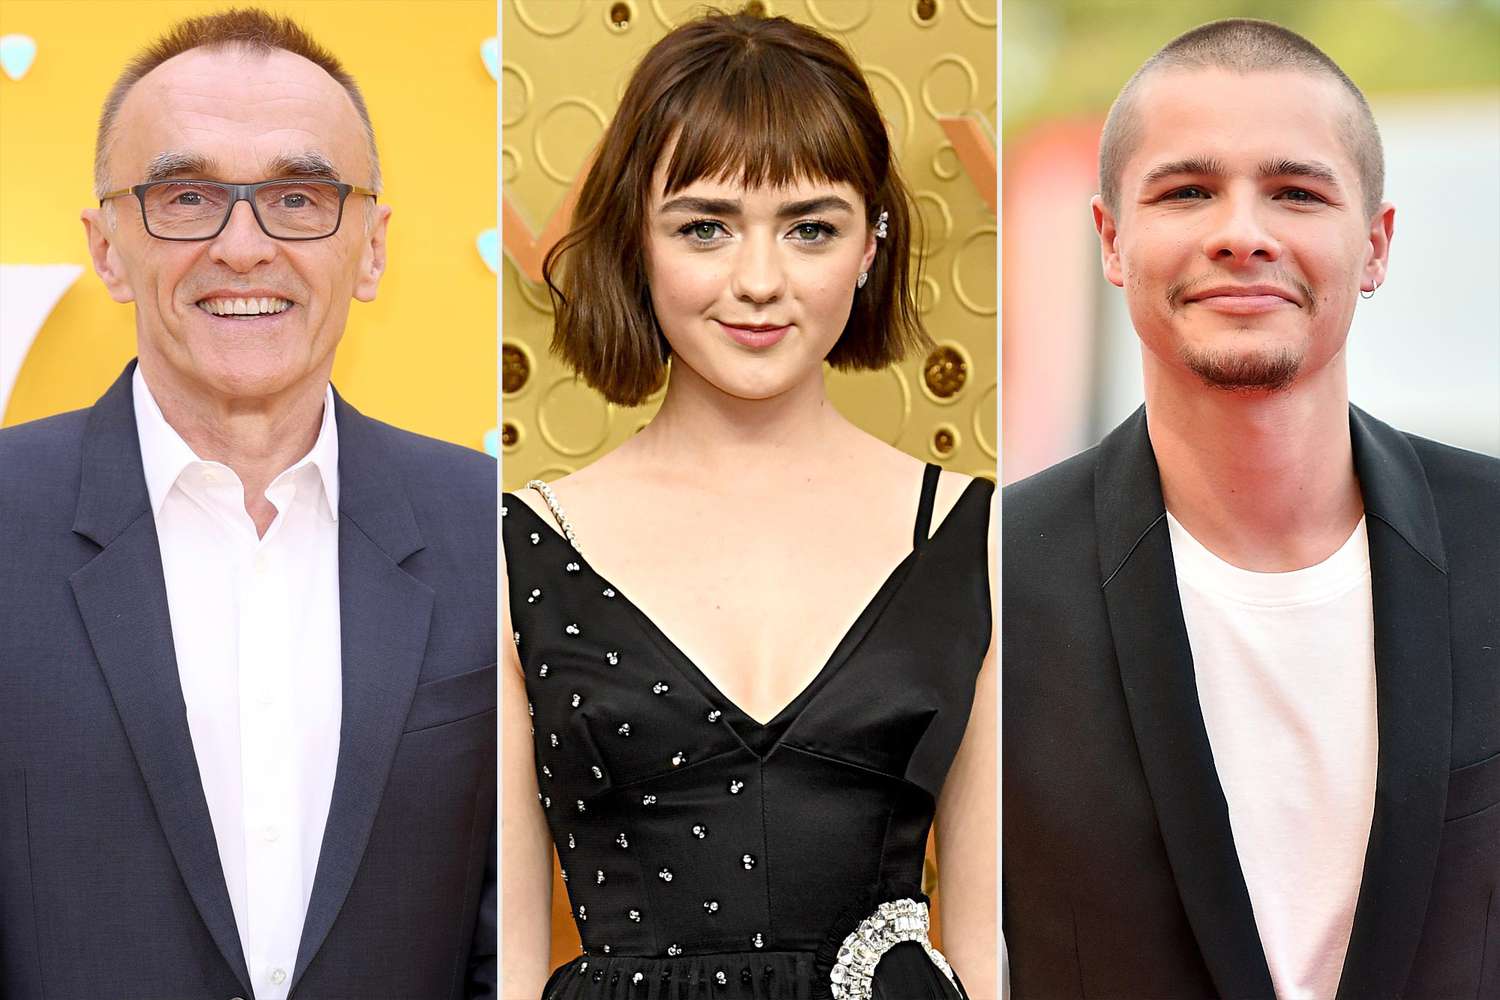 Danny Boyle, Maisie Williams, and Toby Wallace